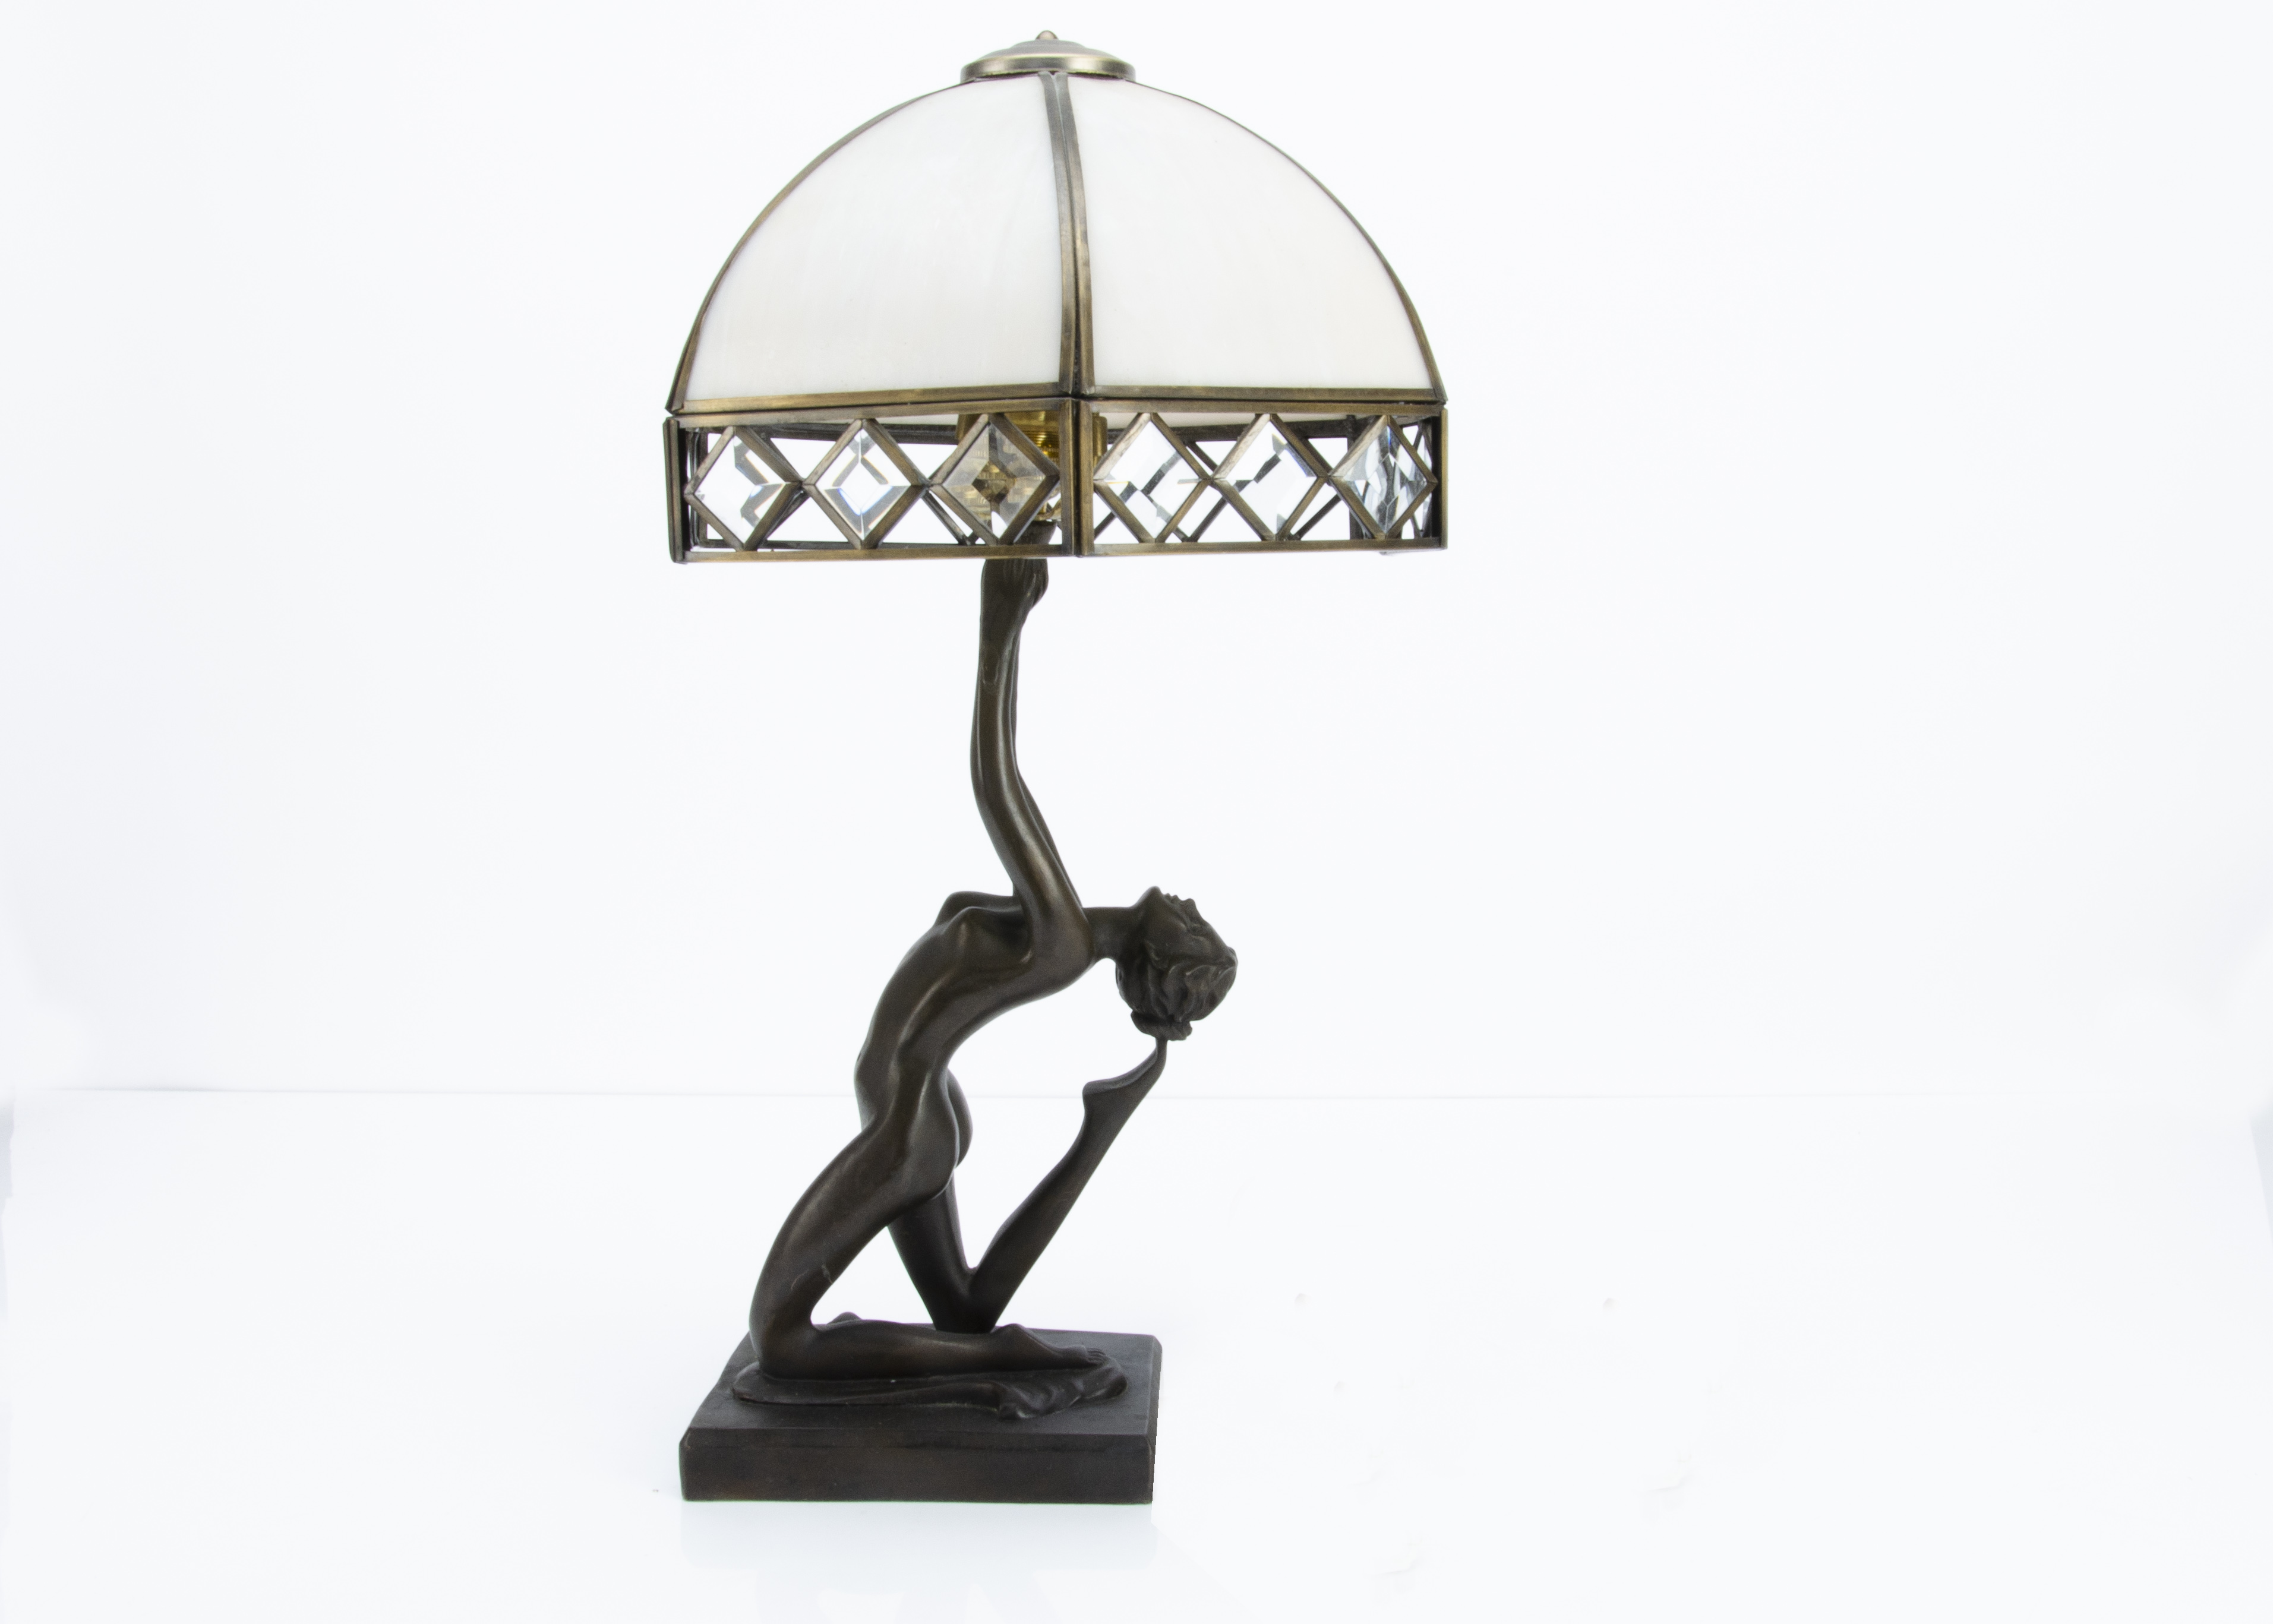 An Art Deco style resin figural lamp base, modelled as a nude female in a kneeling pose with arms